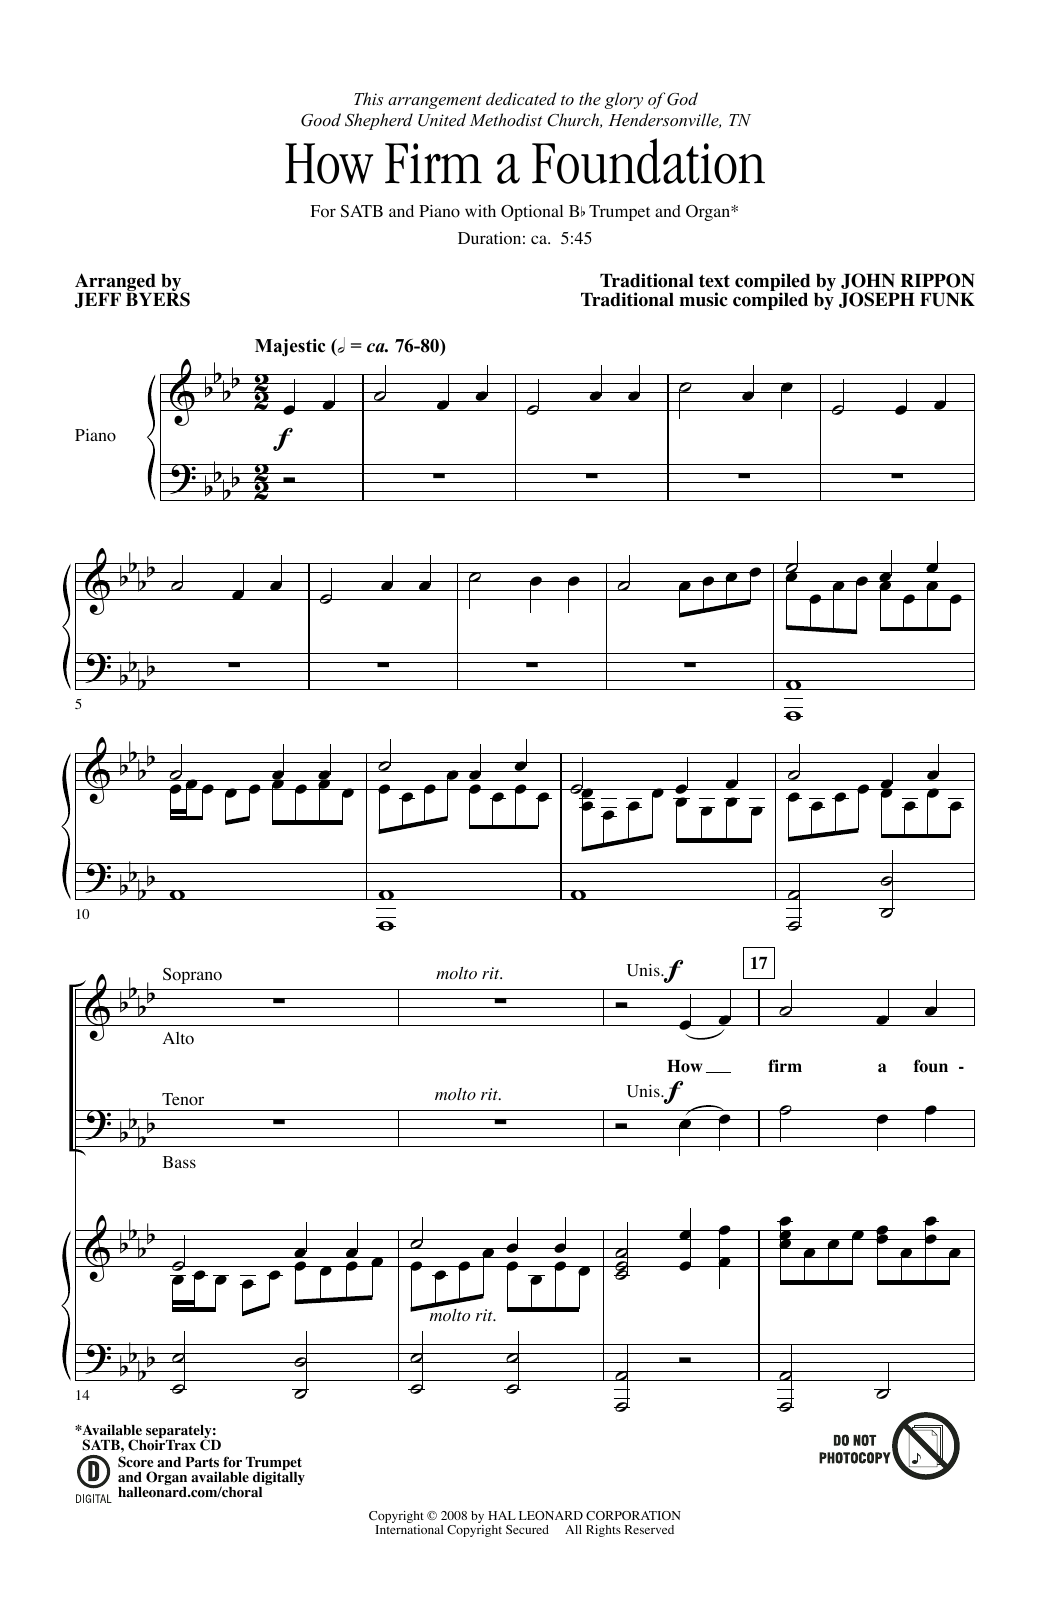 Download Jeff Byers How Firm a Foundation Sheet Music